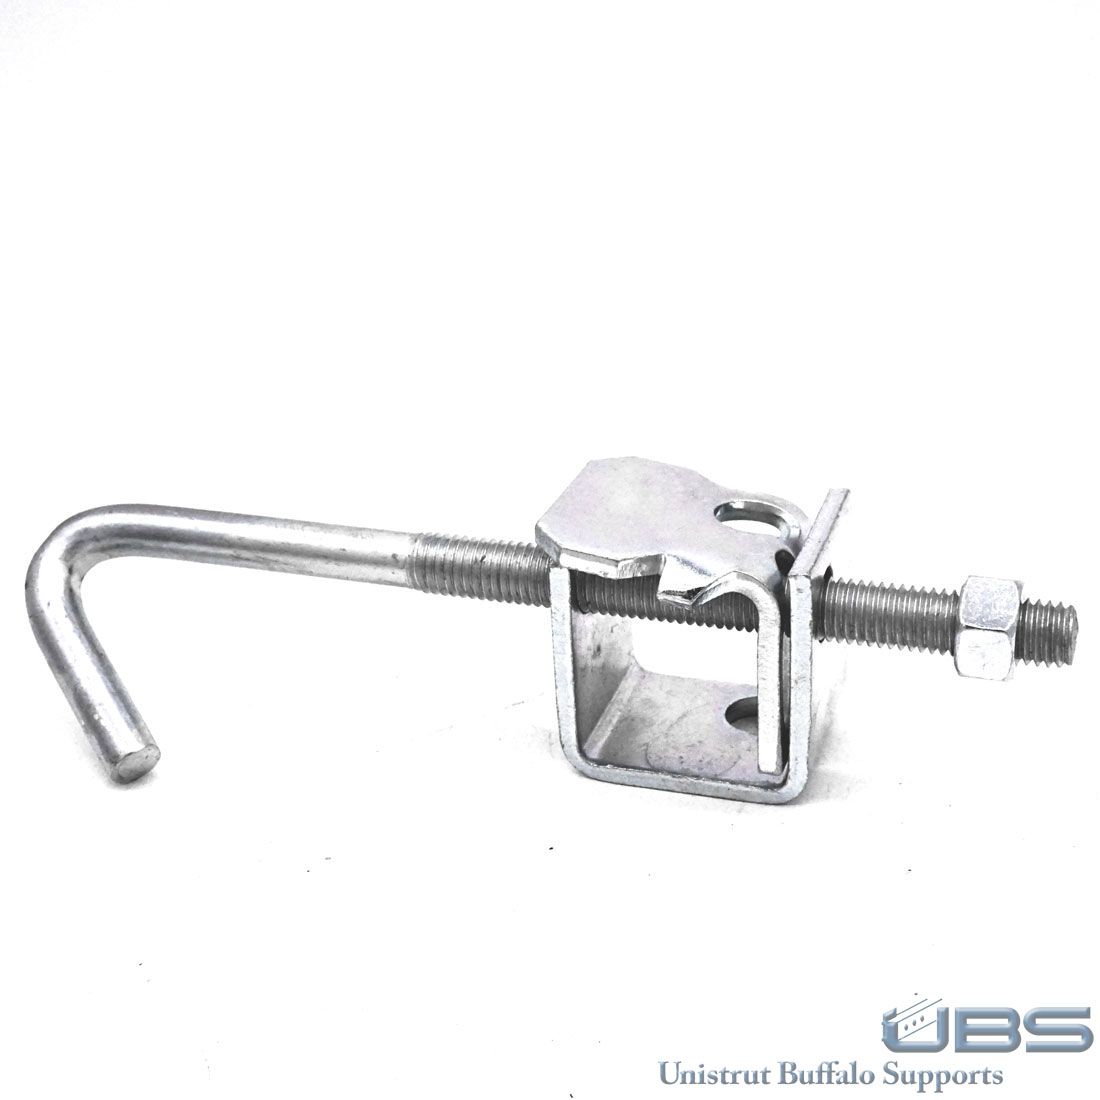 Beam Clamps - Unistrut Buffalo Supports